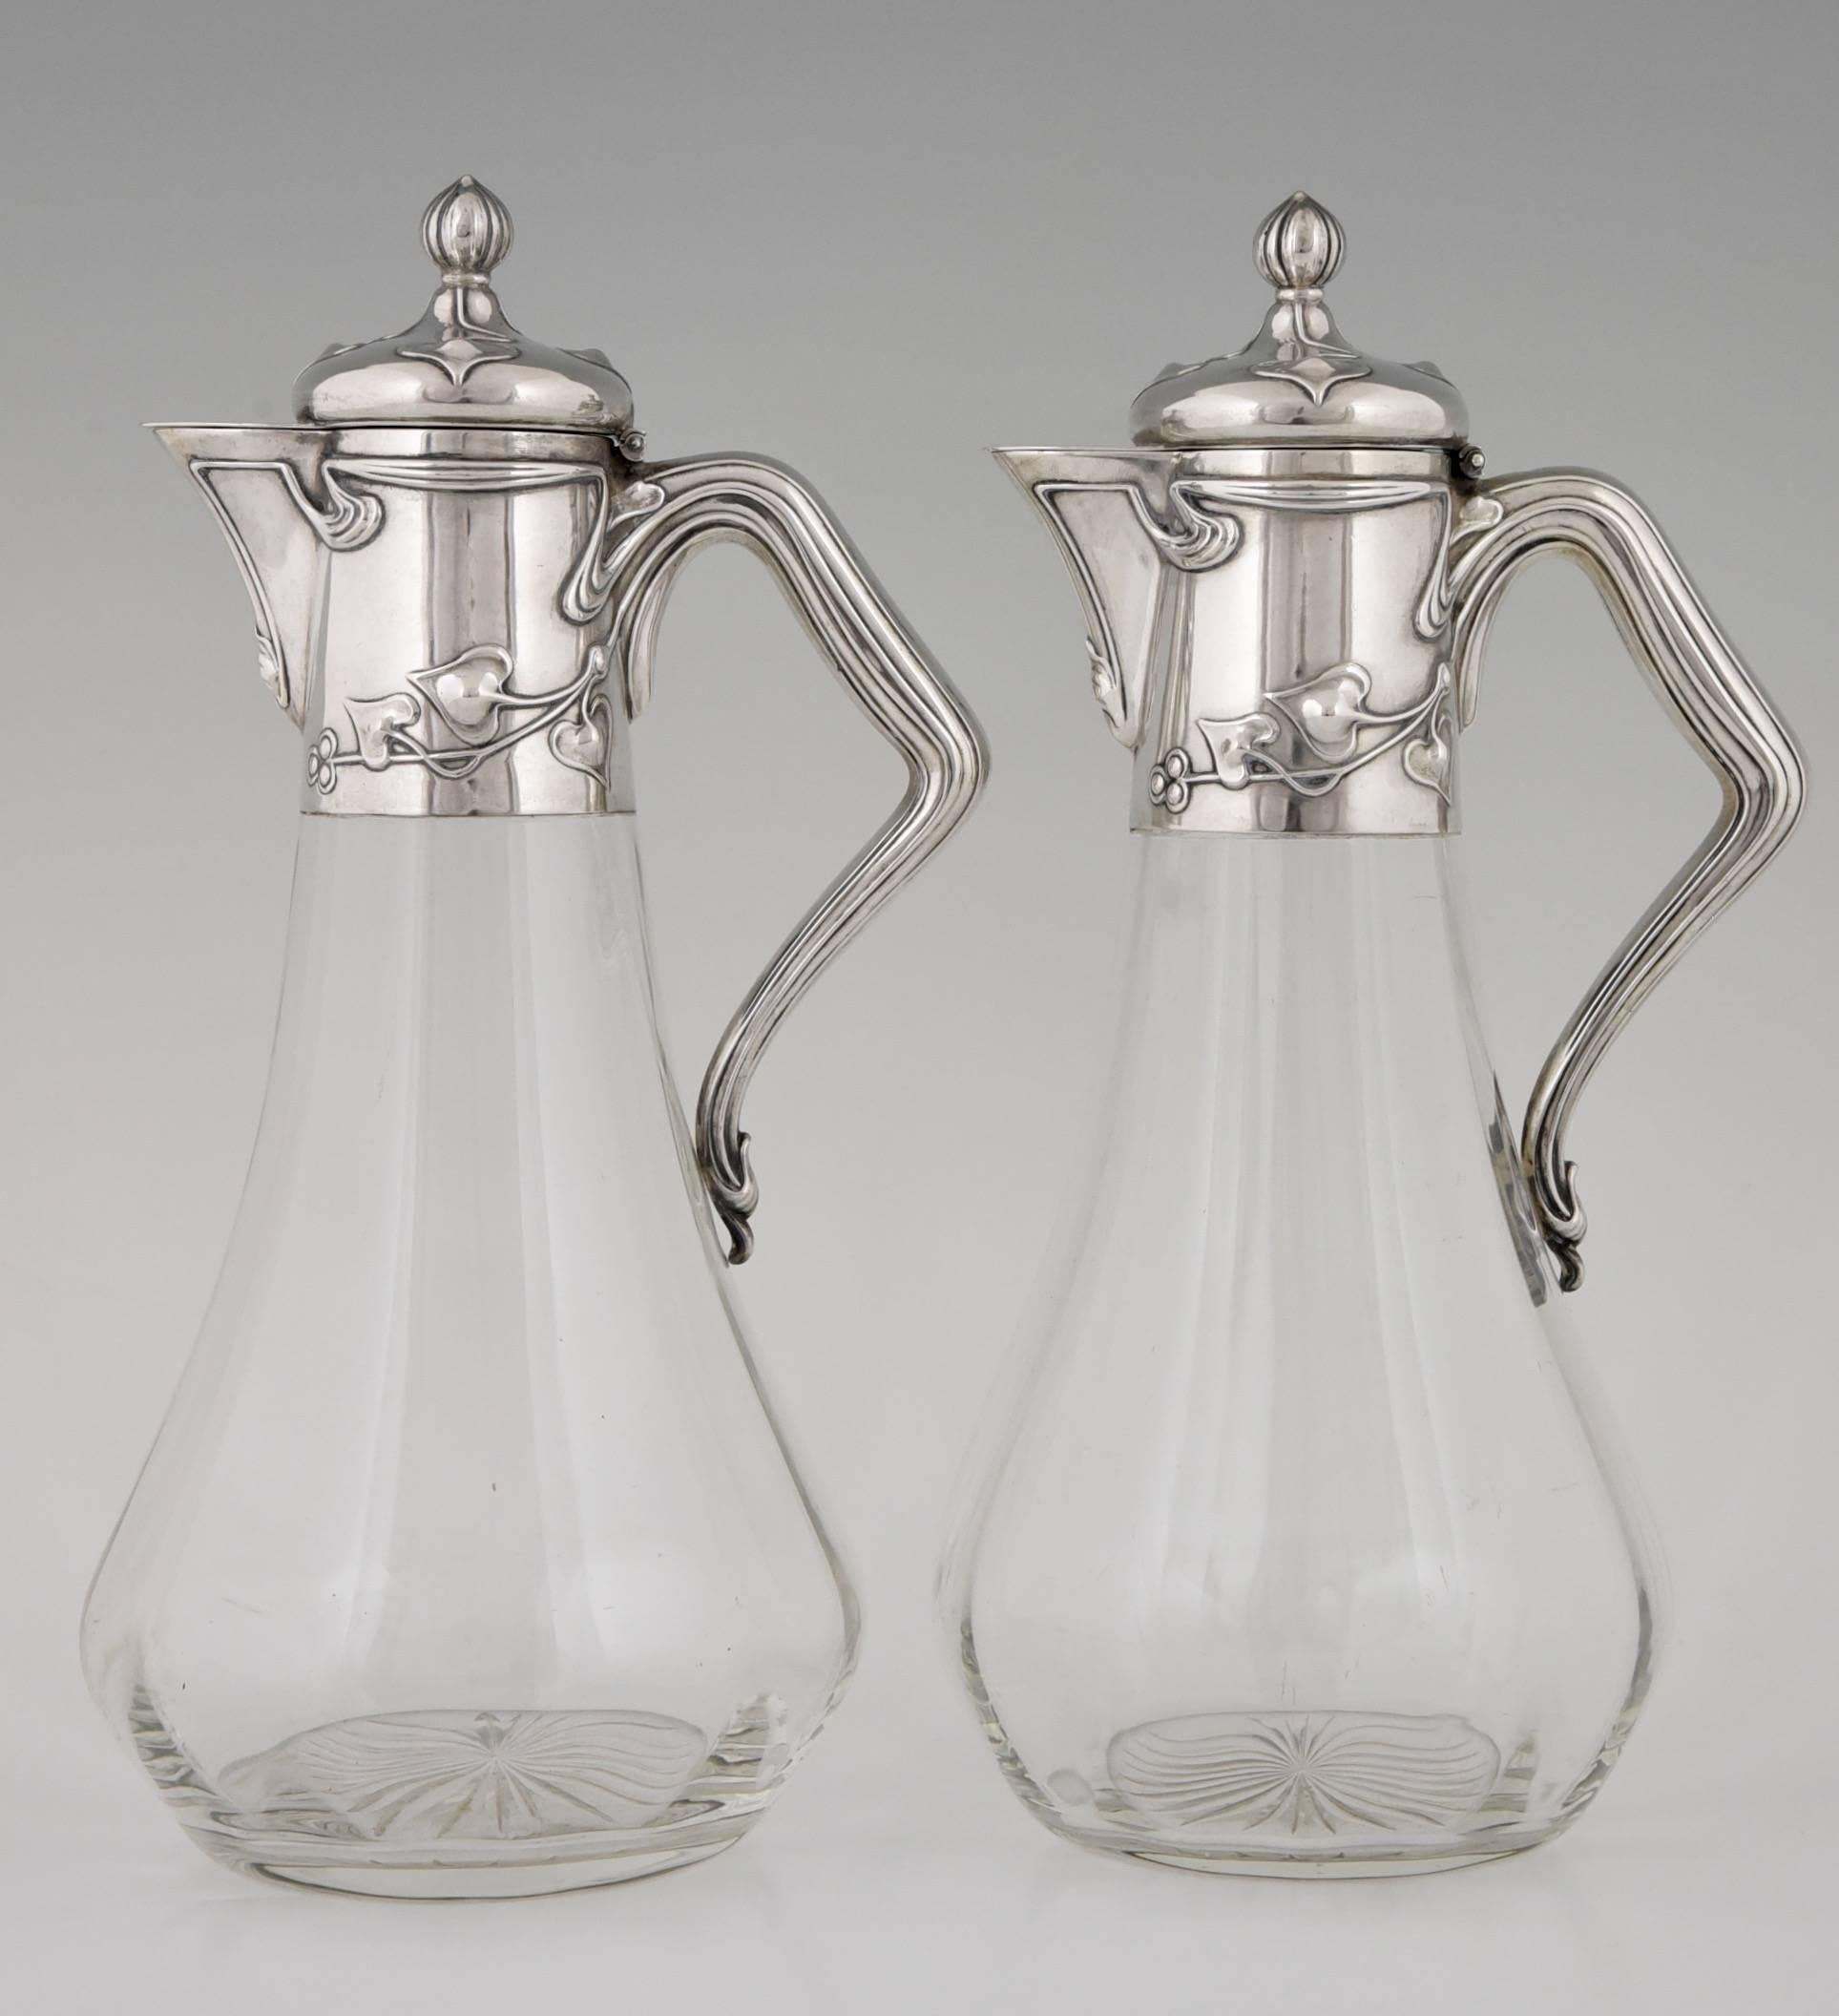 A pair of Art Nouveau silver and glass wine decanters with floral design on mount and handle.
Marked: 
Koch & Bergfeld mark 800
Moon and crown.
Number.
Frey und Söhne (Jeweler where the decanters were sold around 1900)

Literature:
Art